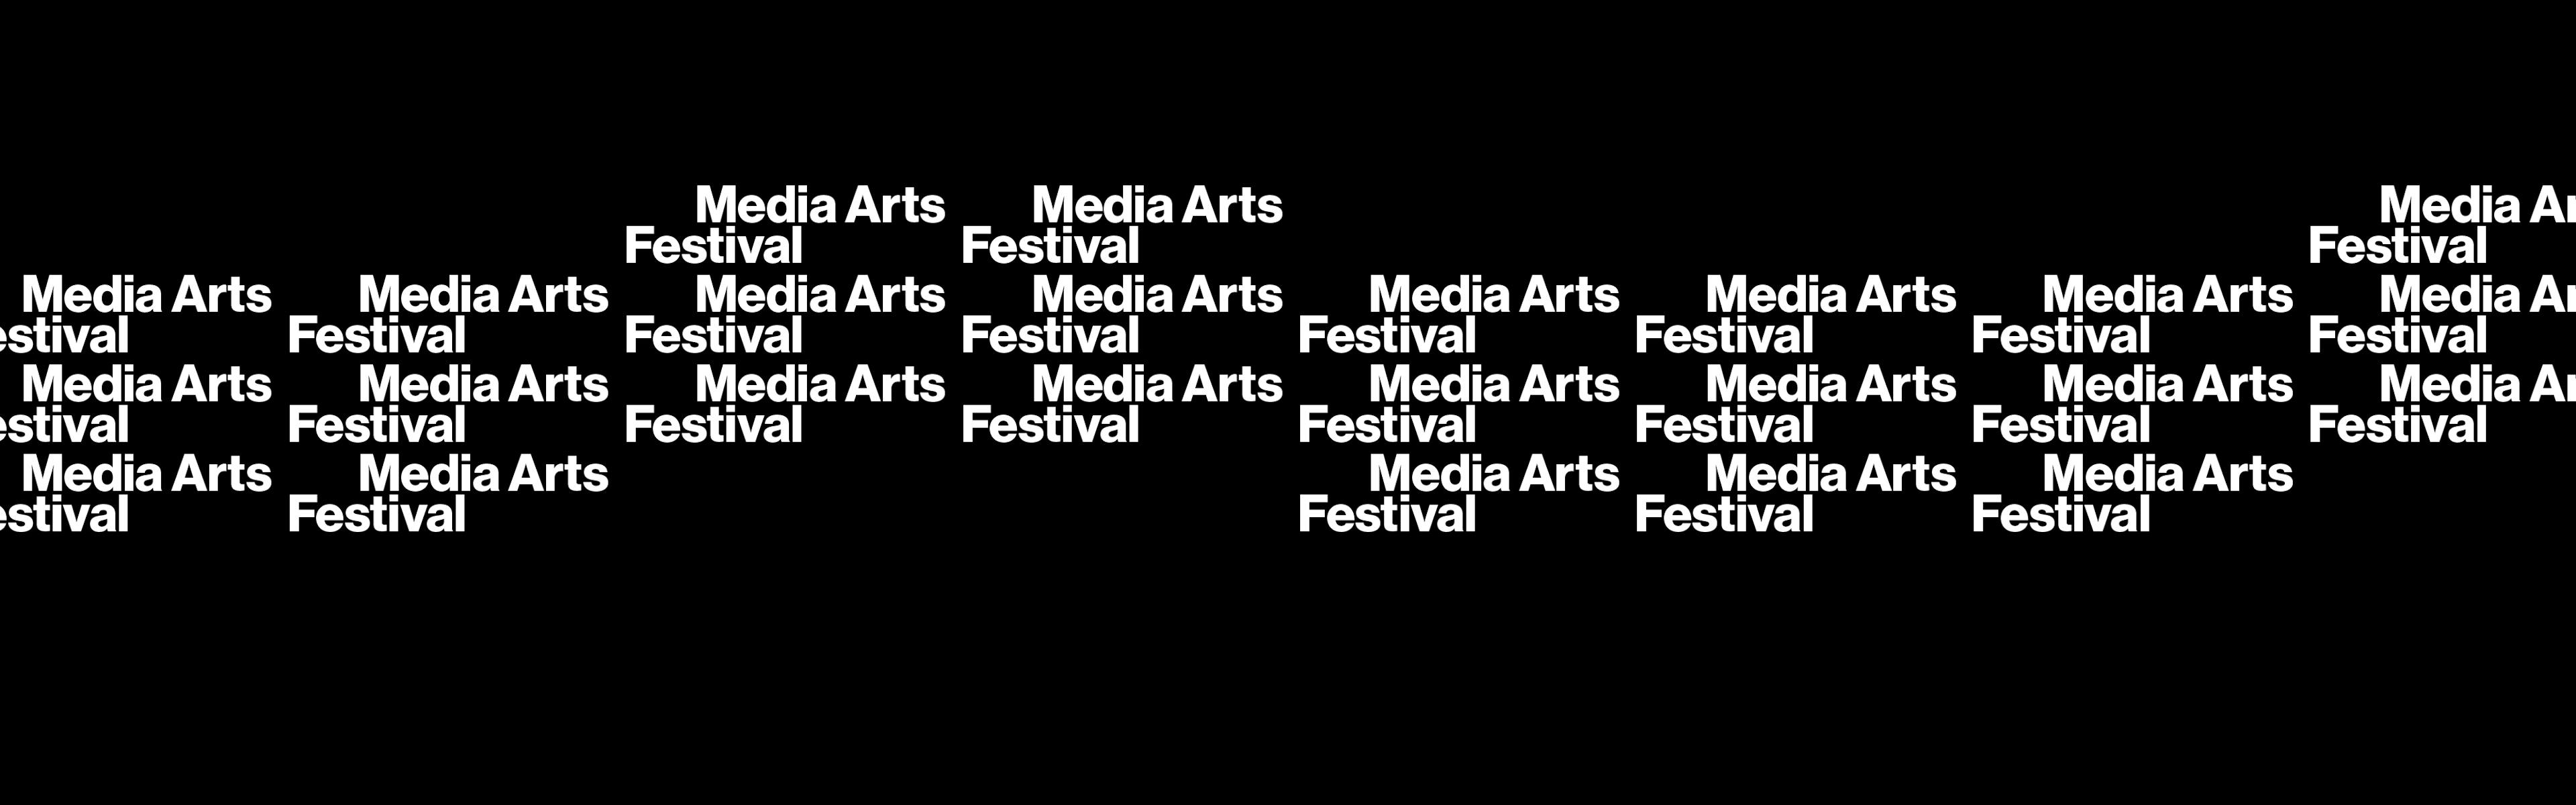 White text against a black background that reads "media arts festival." The text repeats over and over again, forming a pattern.